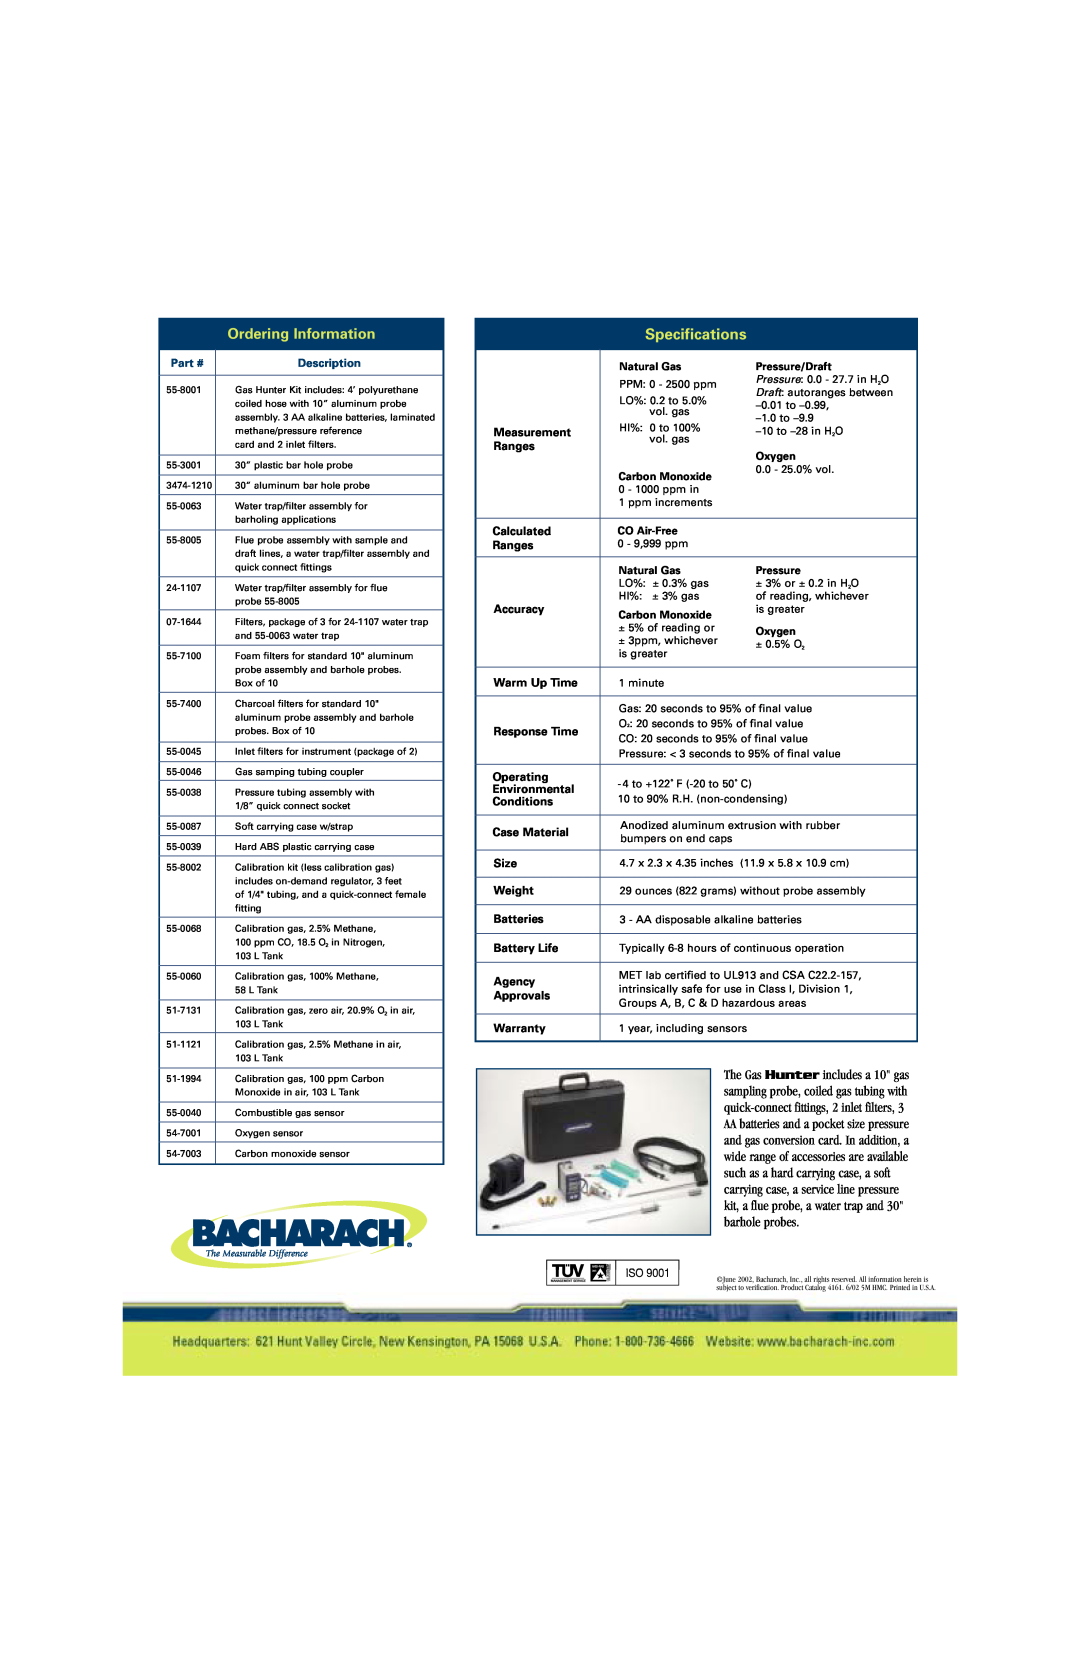 Bacharach Gas Leak Detection manual Specifications, Ordering Information, Description 